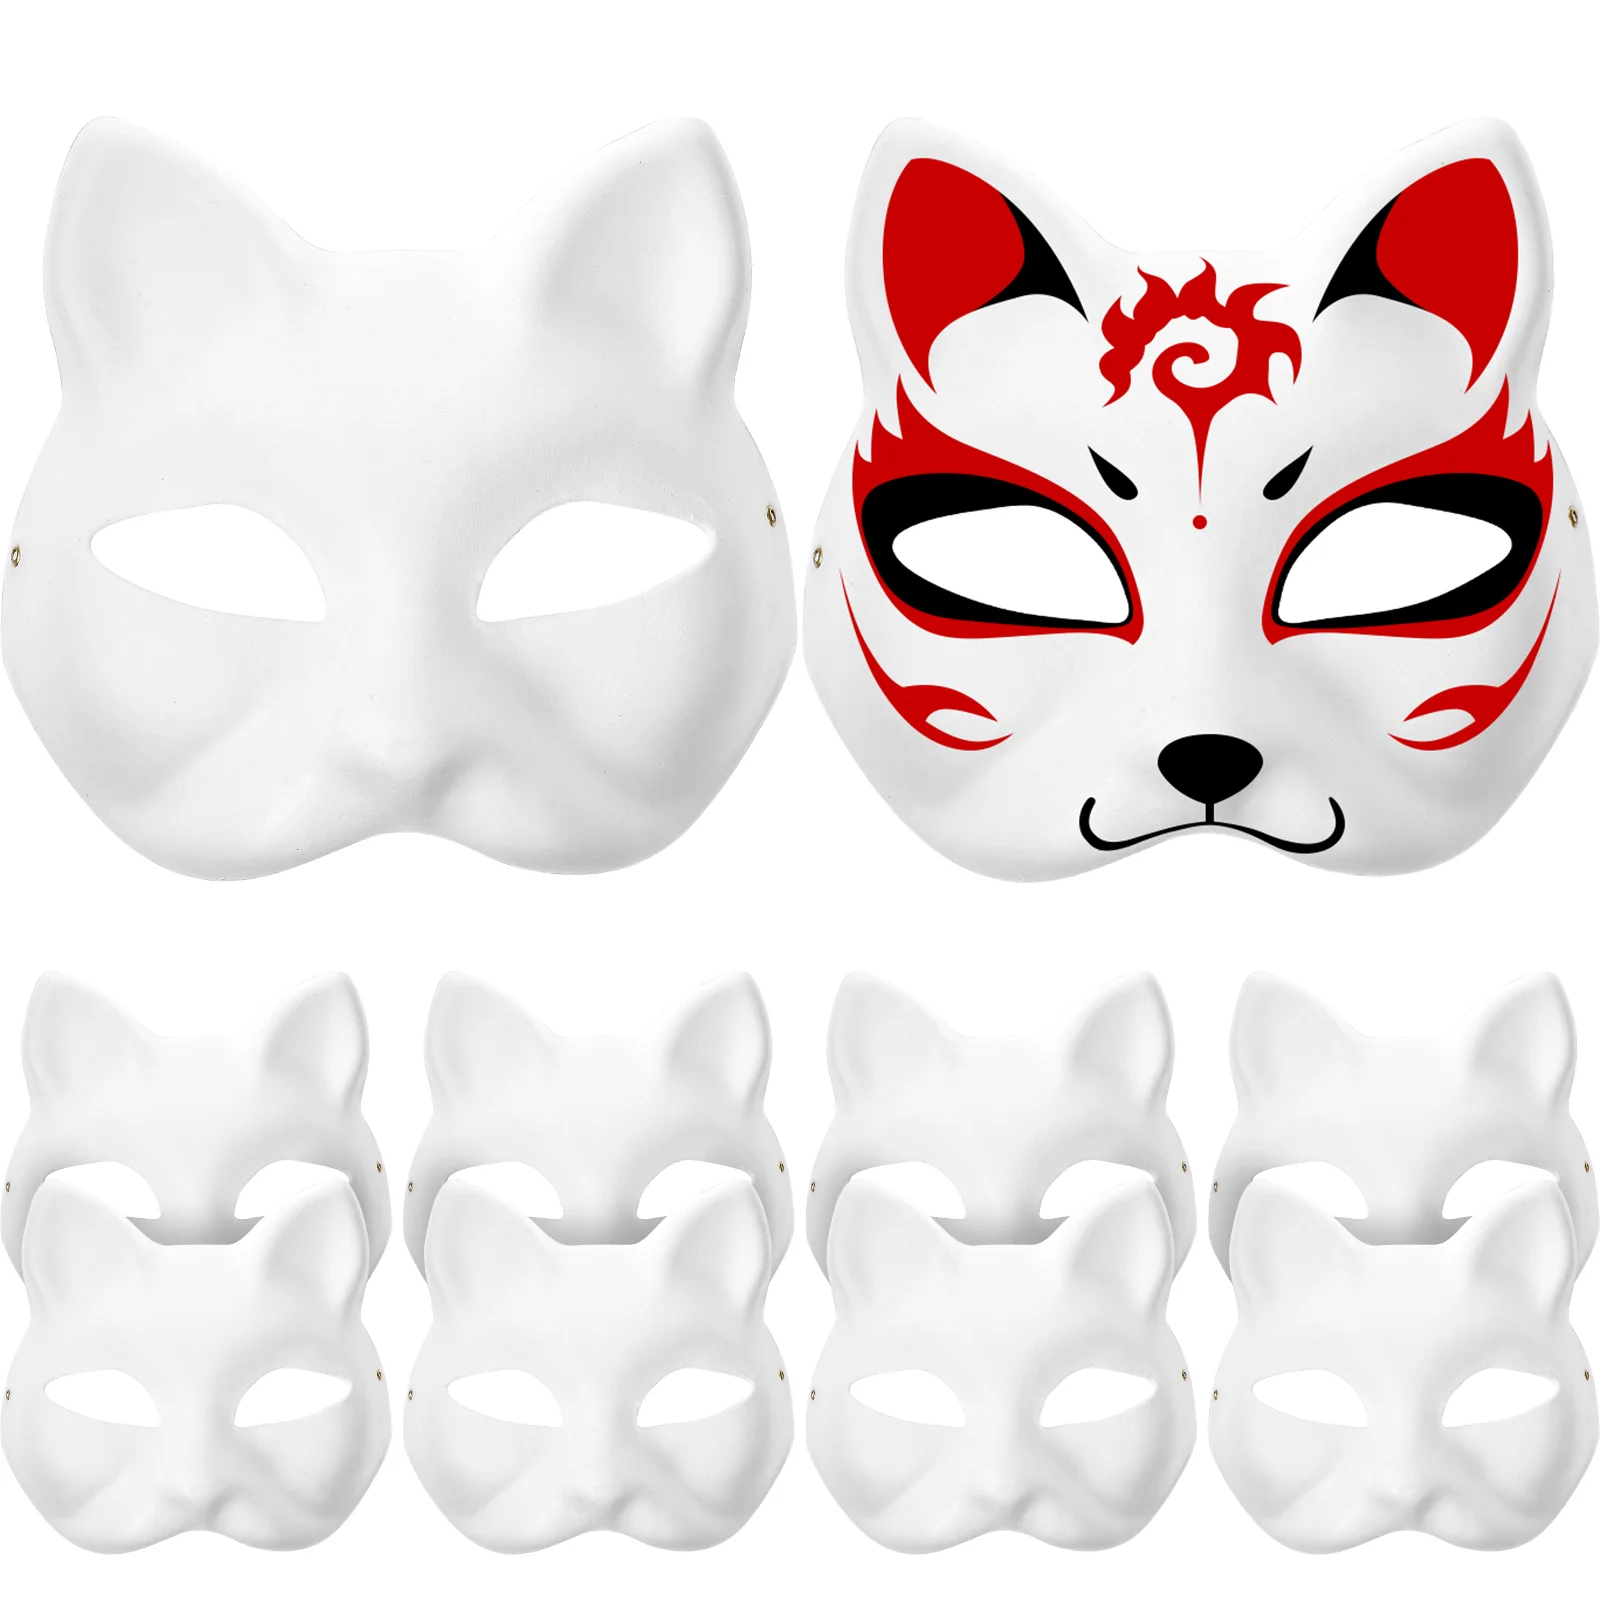 

10 Pcs White Masks Paper Masks Blank Cat Mask for Decorating DIY Painting Masquerade Cosplay Party